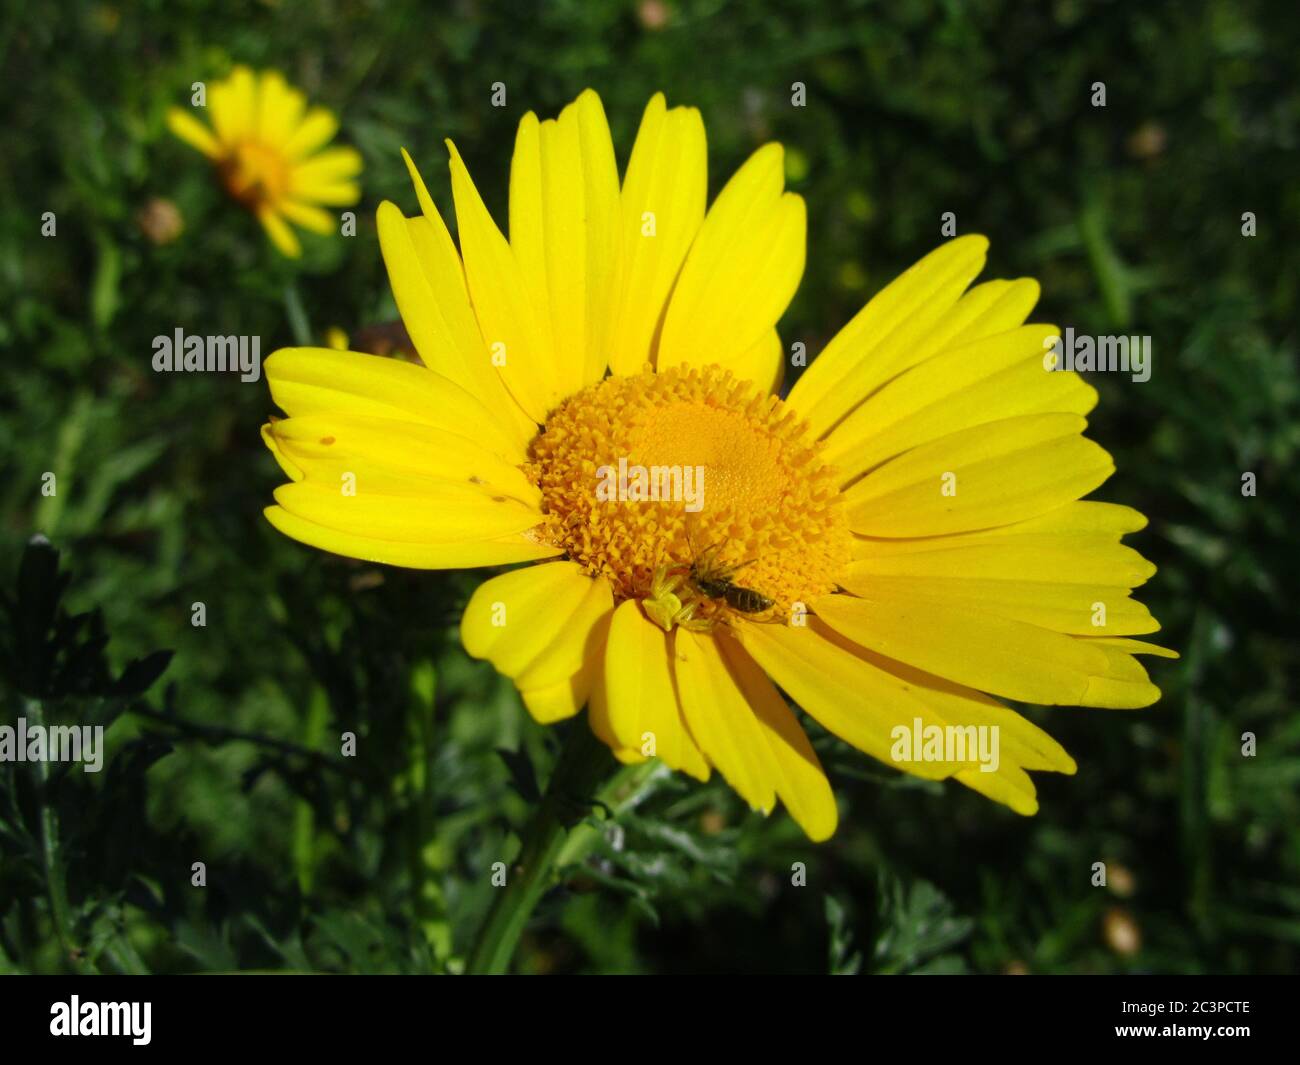 Crab spider holding a bee on a Crown Daisy flower captured in Malta Stock Photo